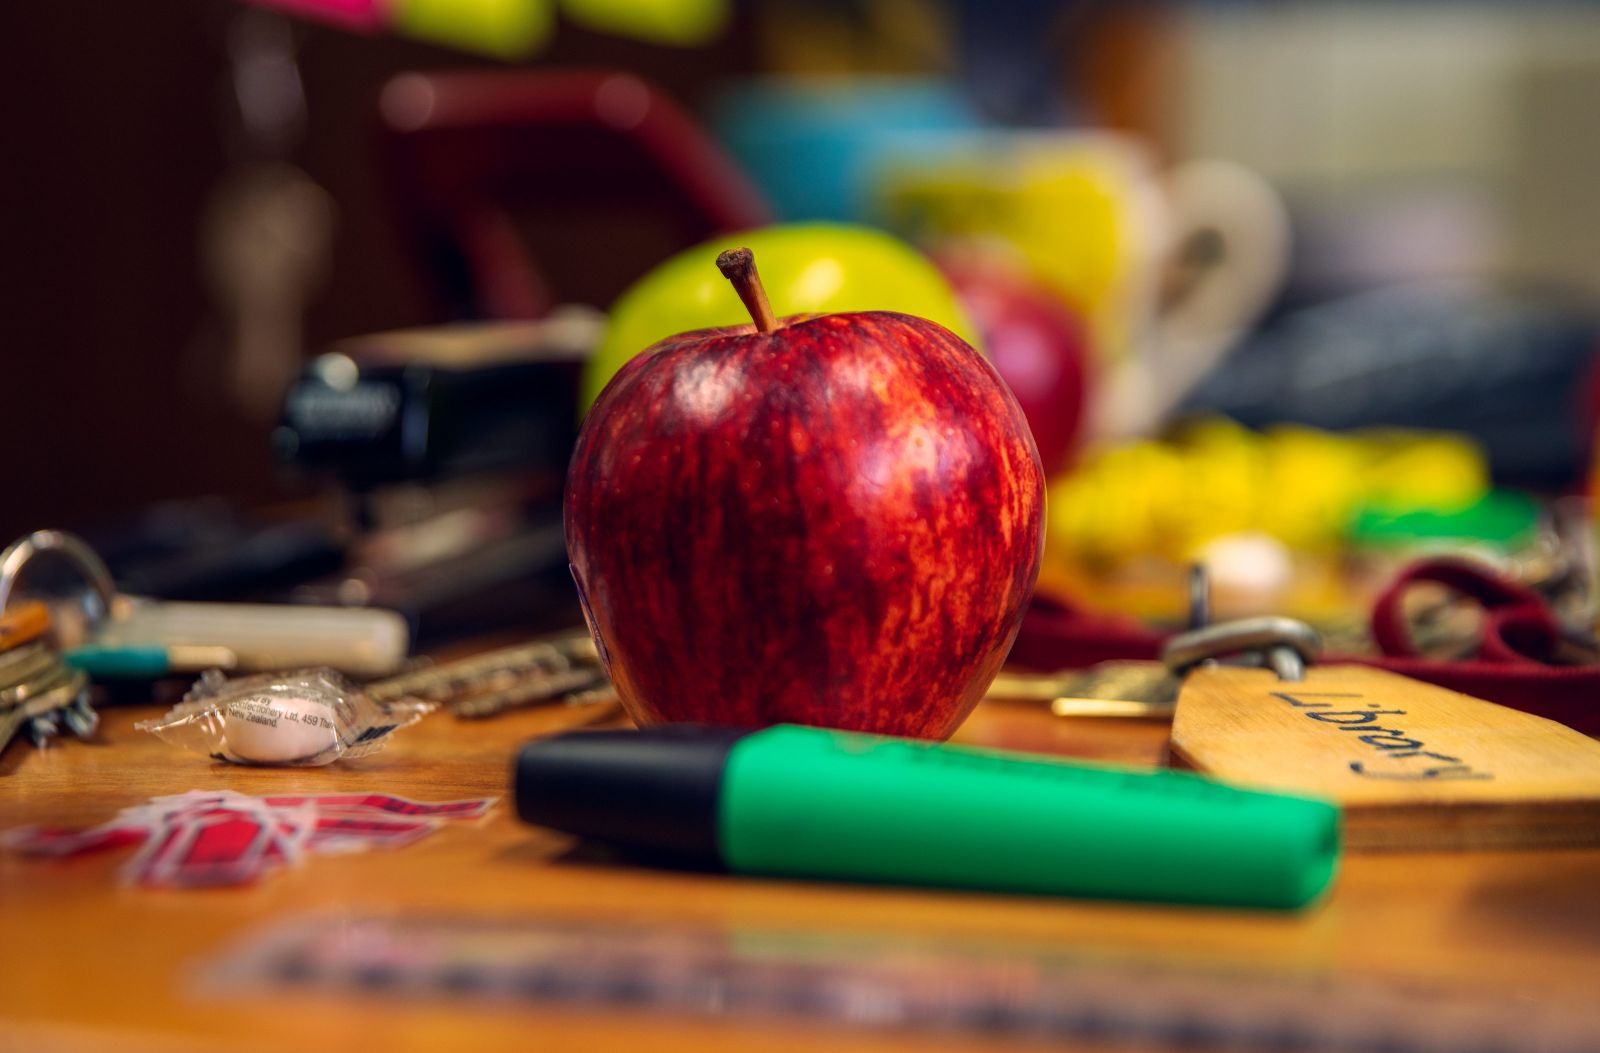 Image of a desk with keys, stationary and an apple.